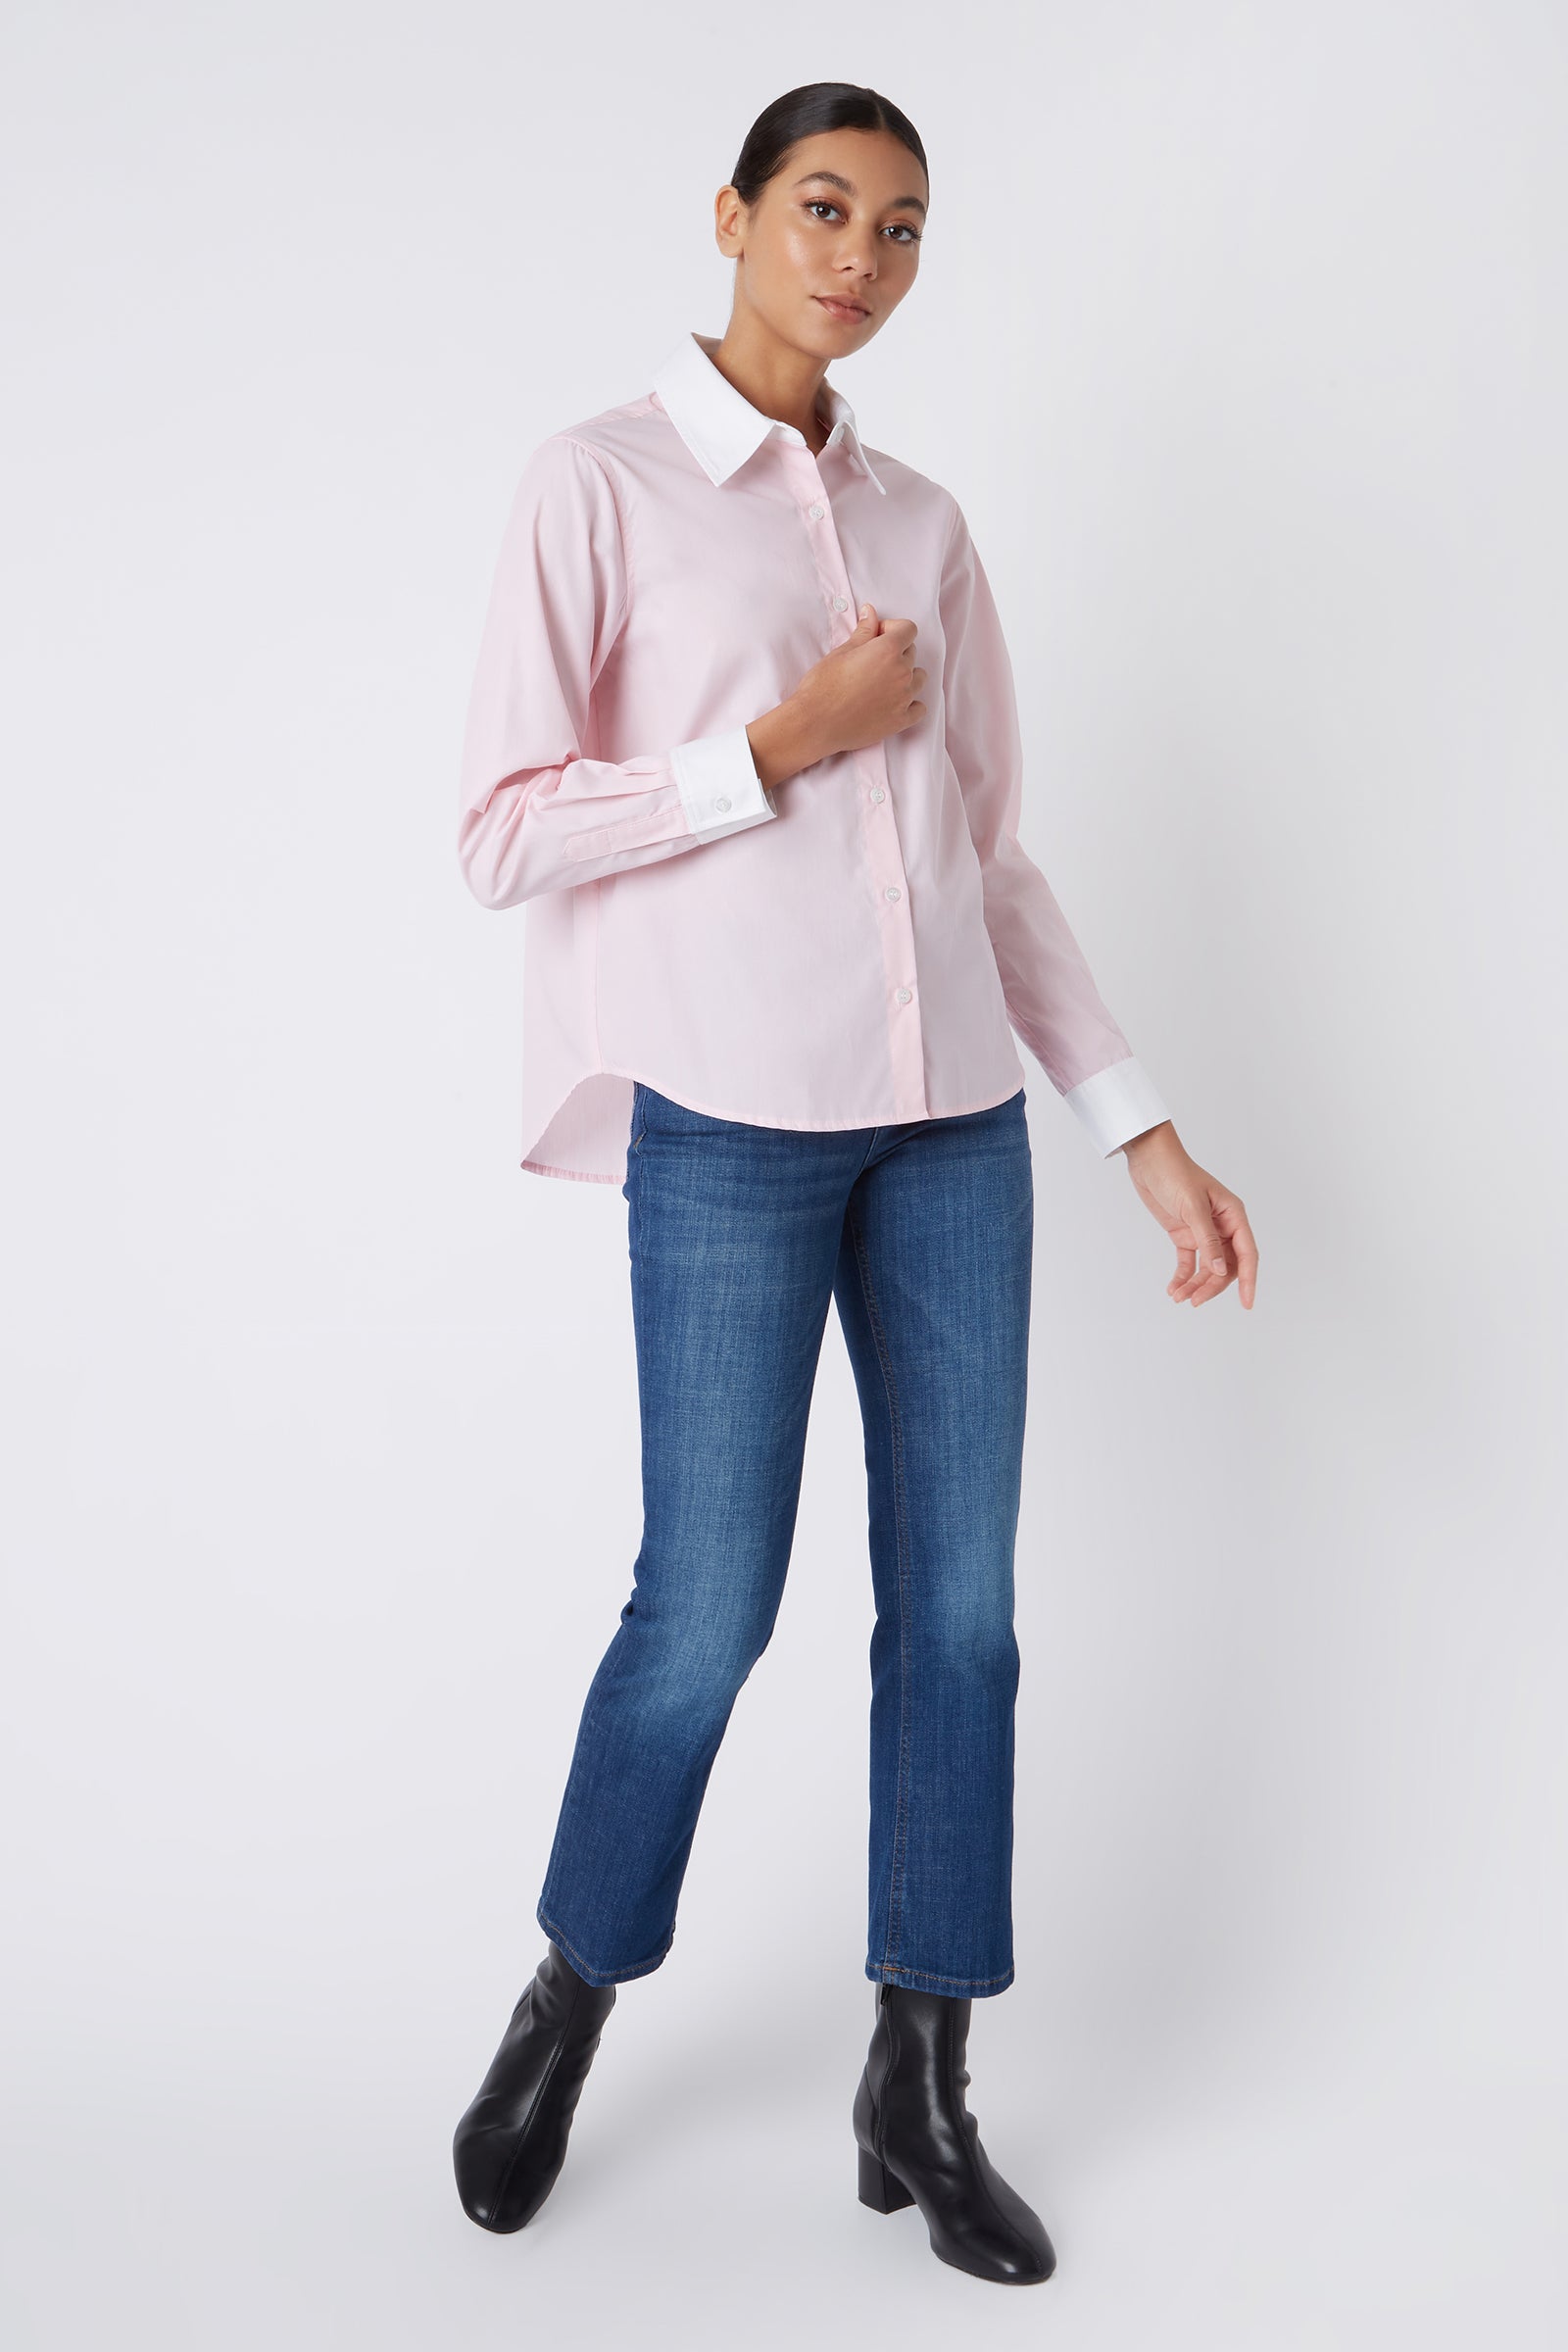 Kal Rieman Classic Tailored Shirt in Pink with White on Model Walking Full Front View